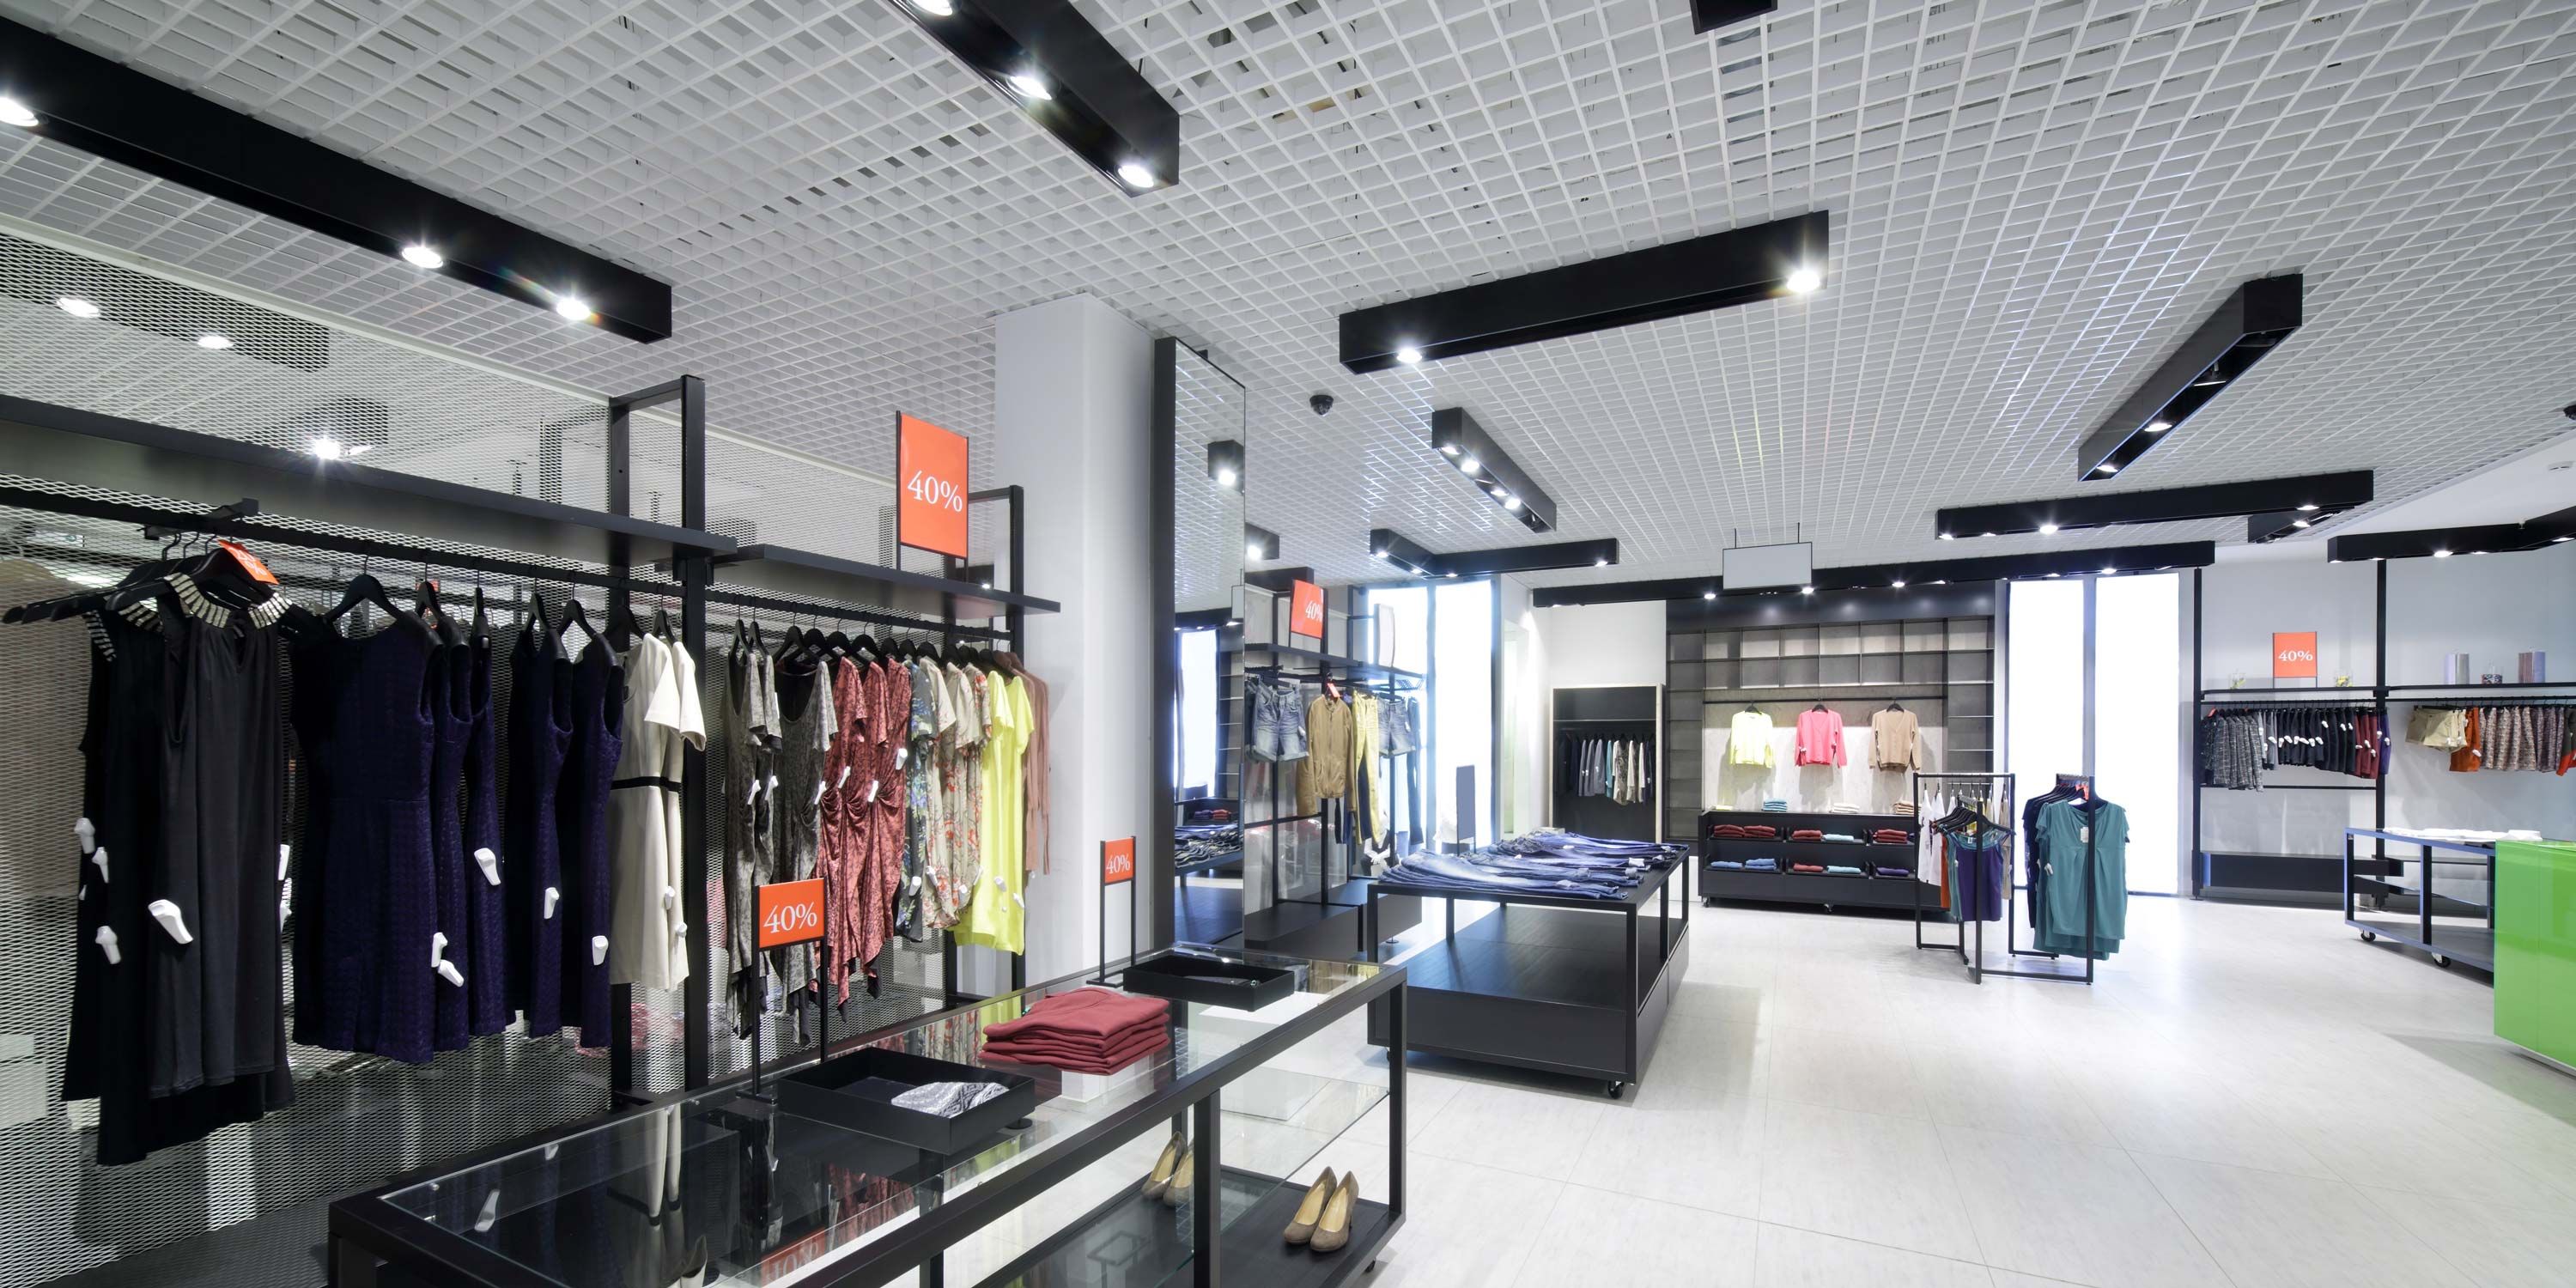 retail space with clothing and LED lighting on the ceiling